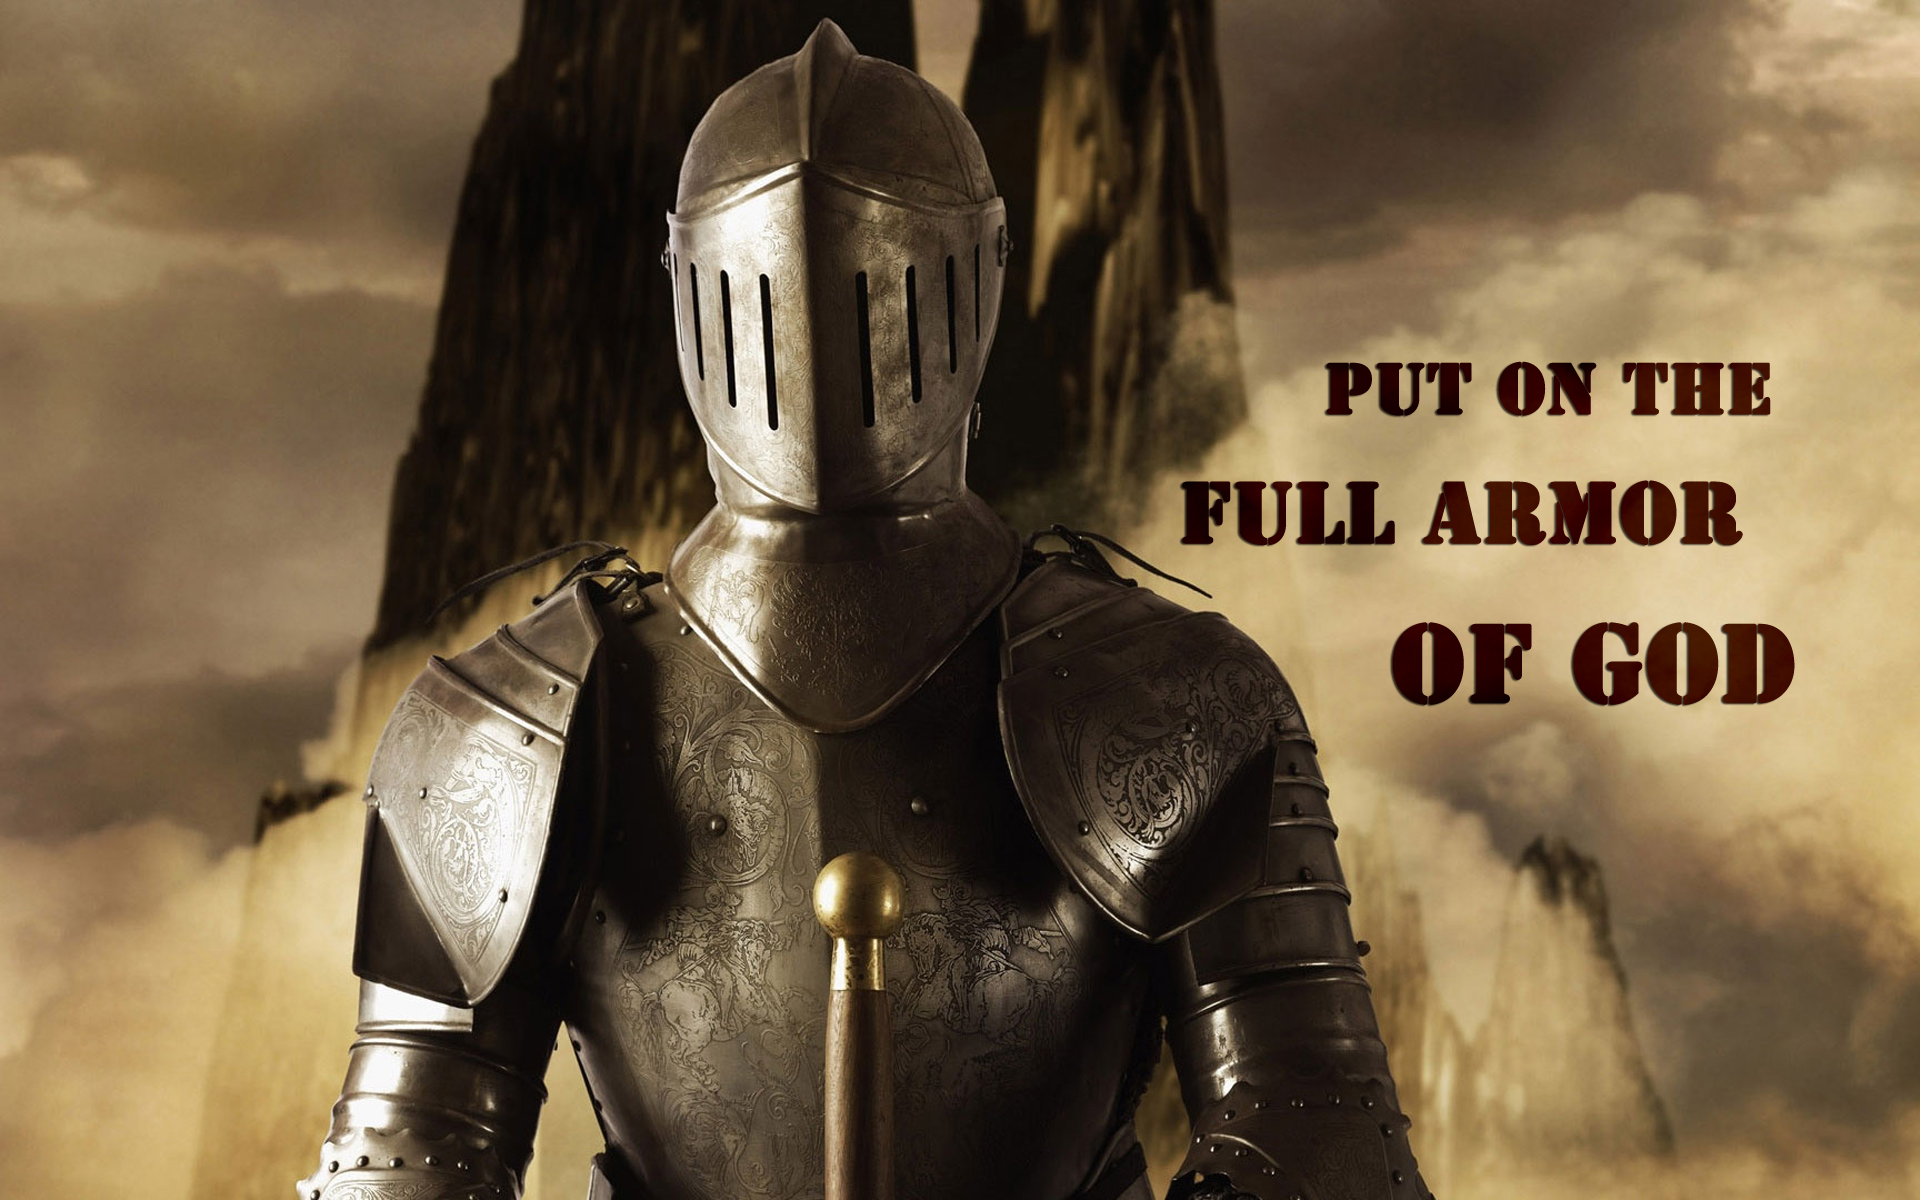 Put on the full armor of God so that you can take your stand against